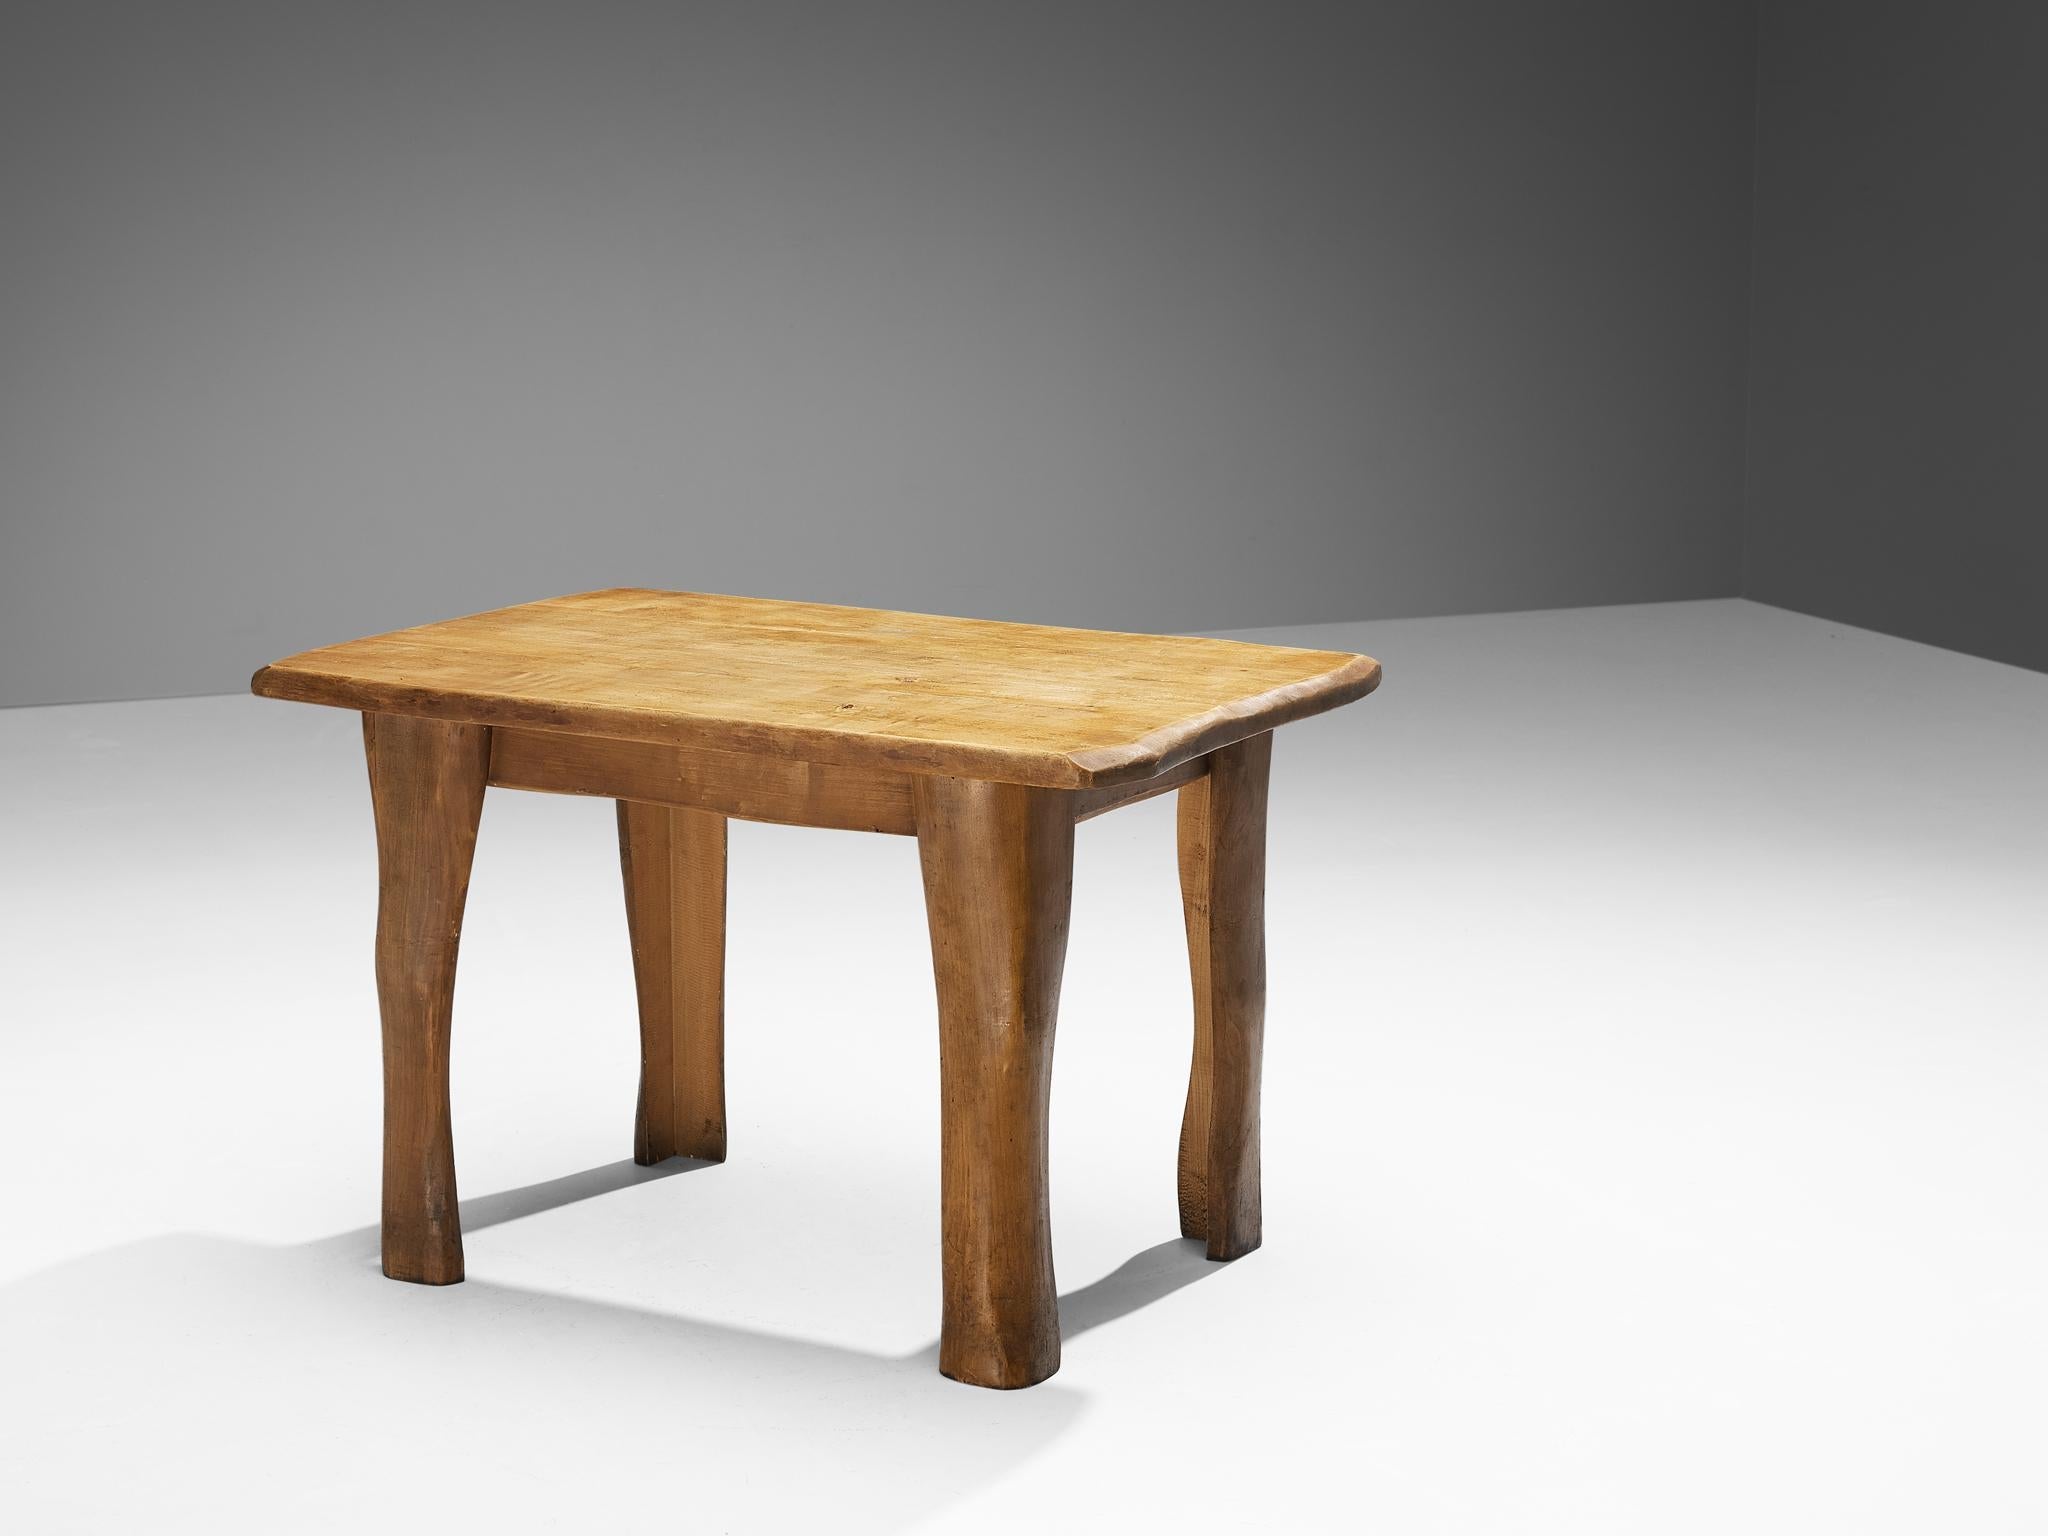 Organic Brutalist Set of Dining Table and Pair of Chairs in Maple